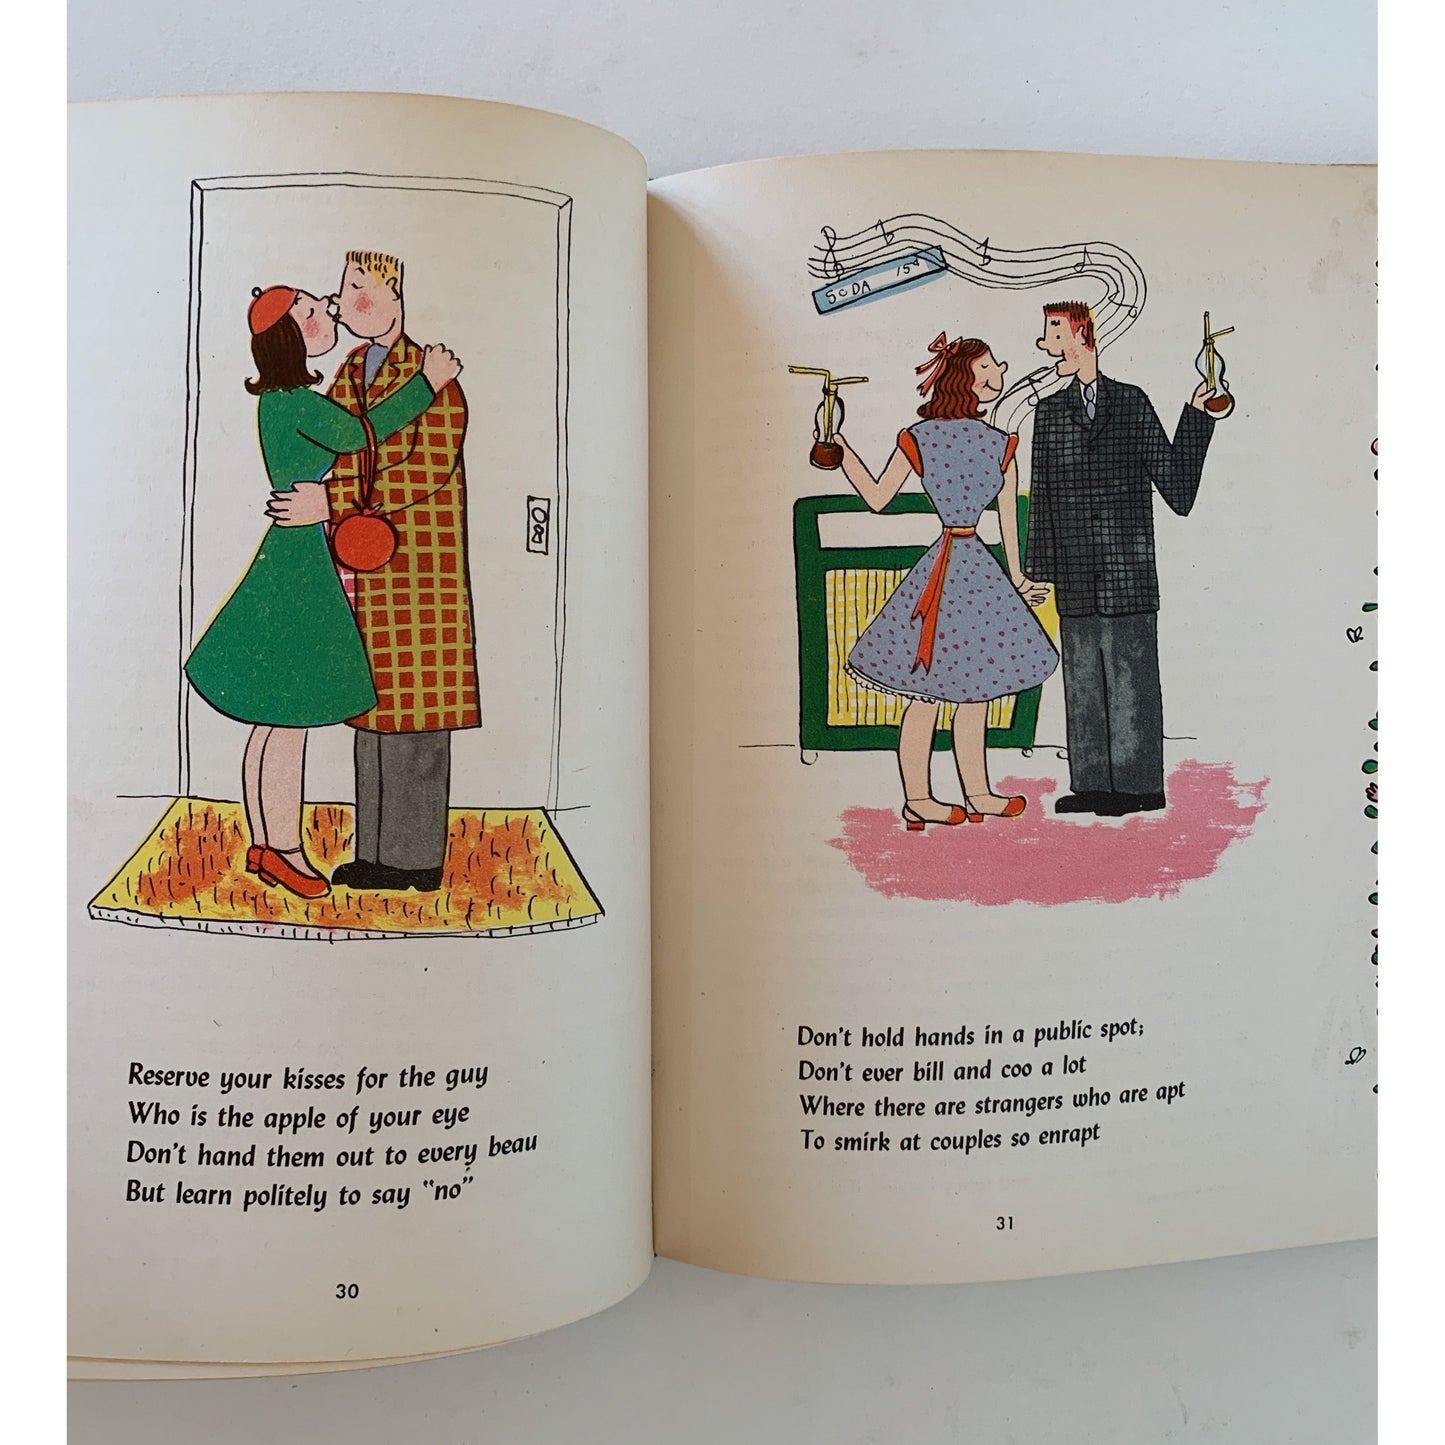 Your Manners are Showing, Handbook of Teen-Age Know-How, 1946 Hardcover Etiquette Book